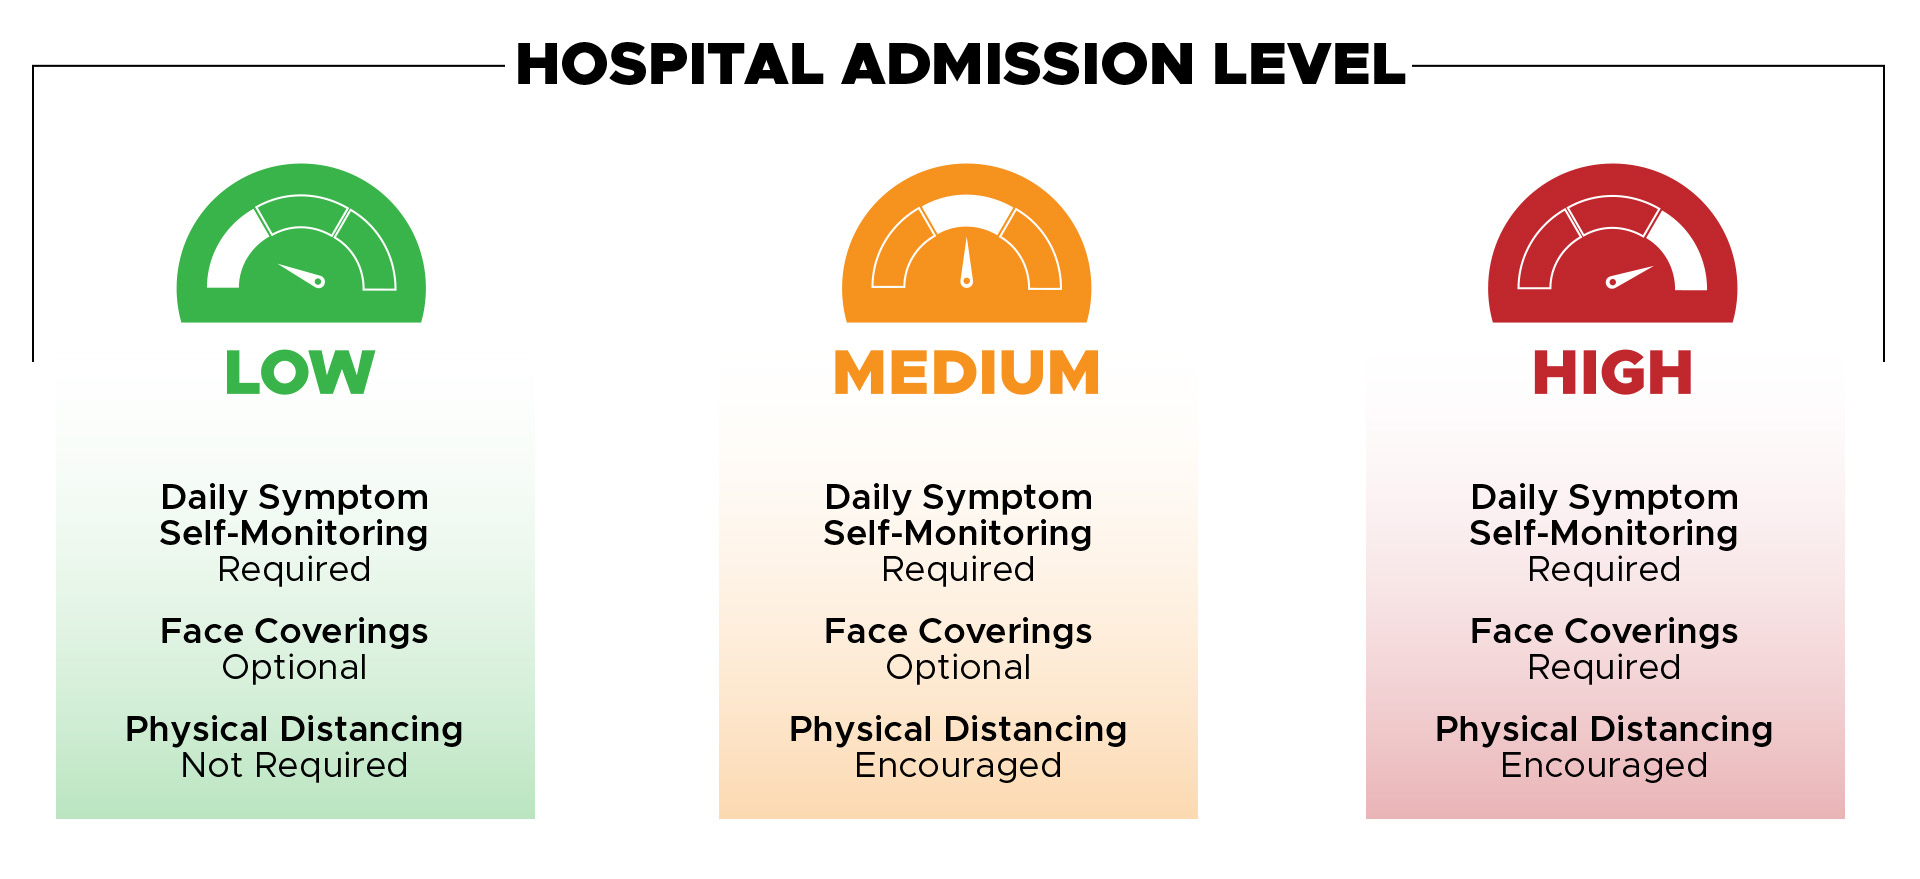 Image displaying requirements for safety practices during low, medium, and high COVID levels on PNNL campus grounds.